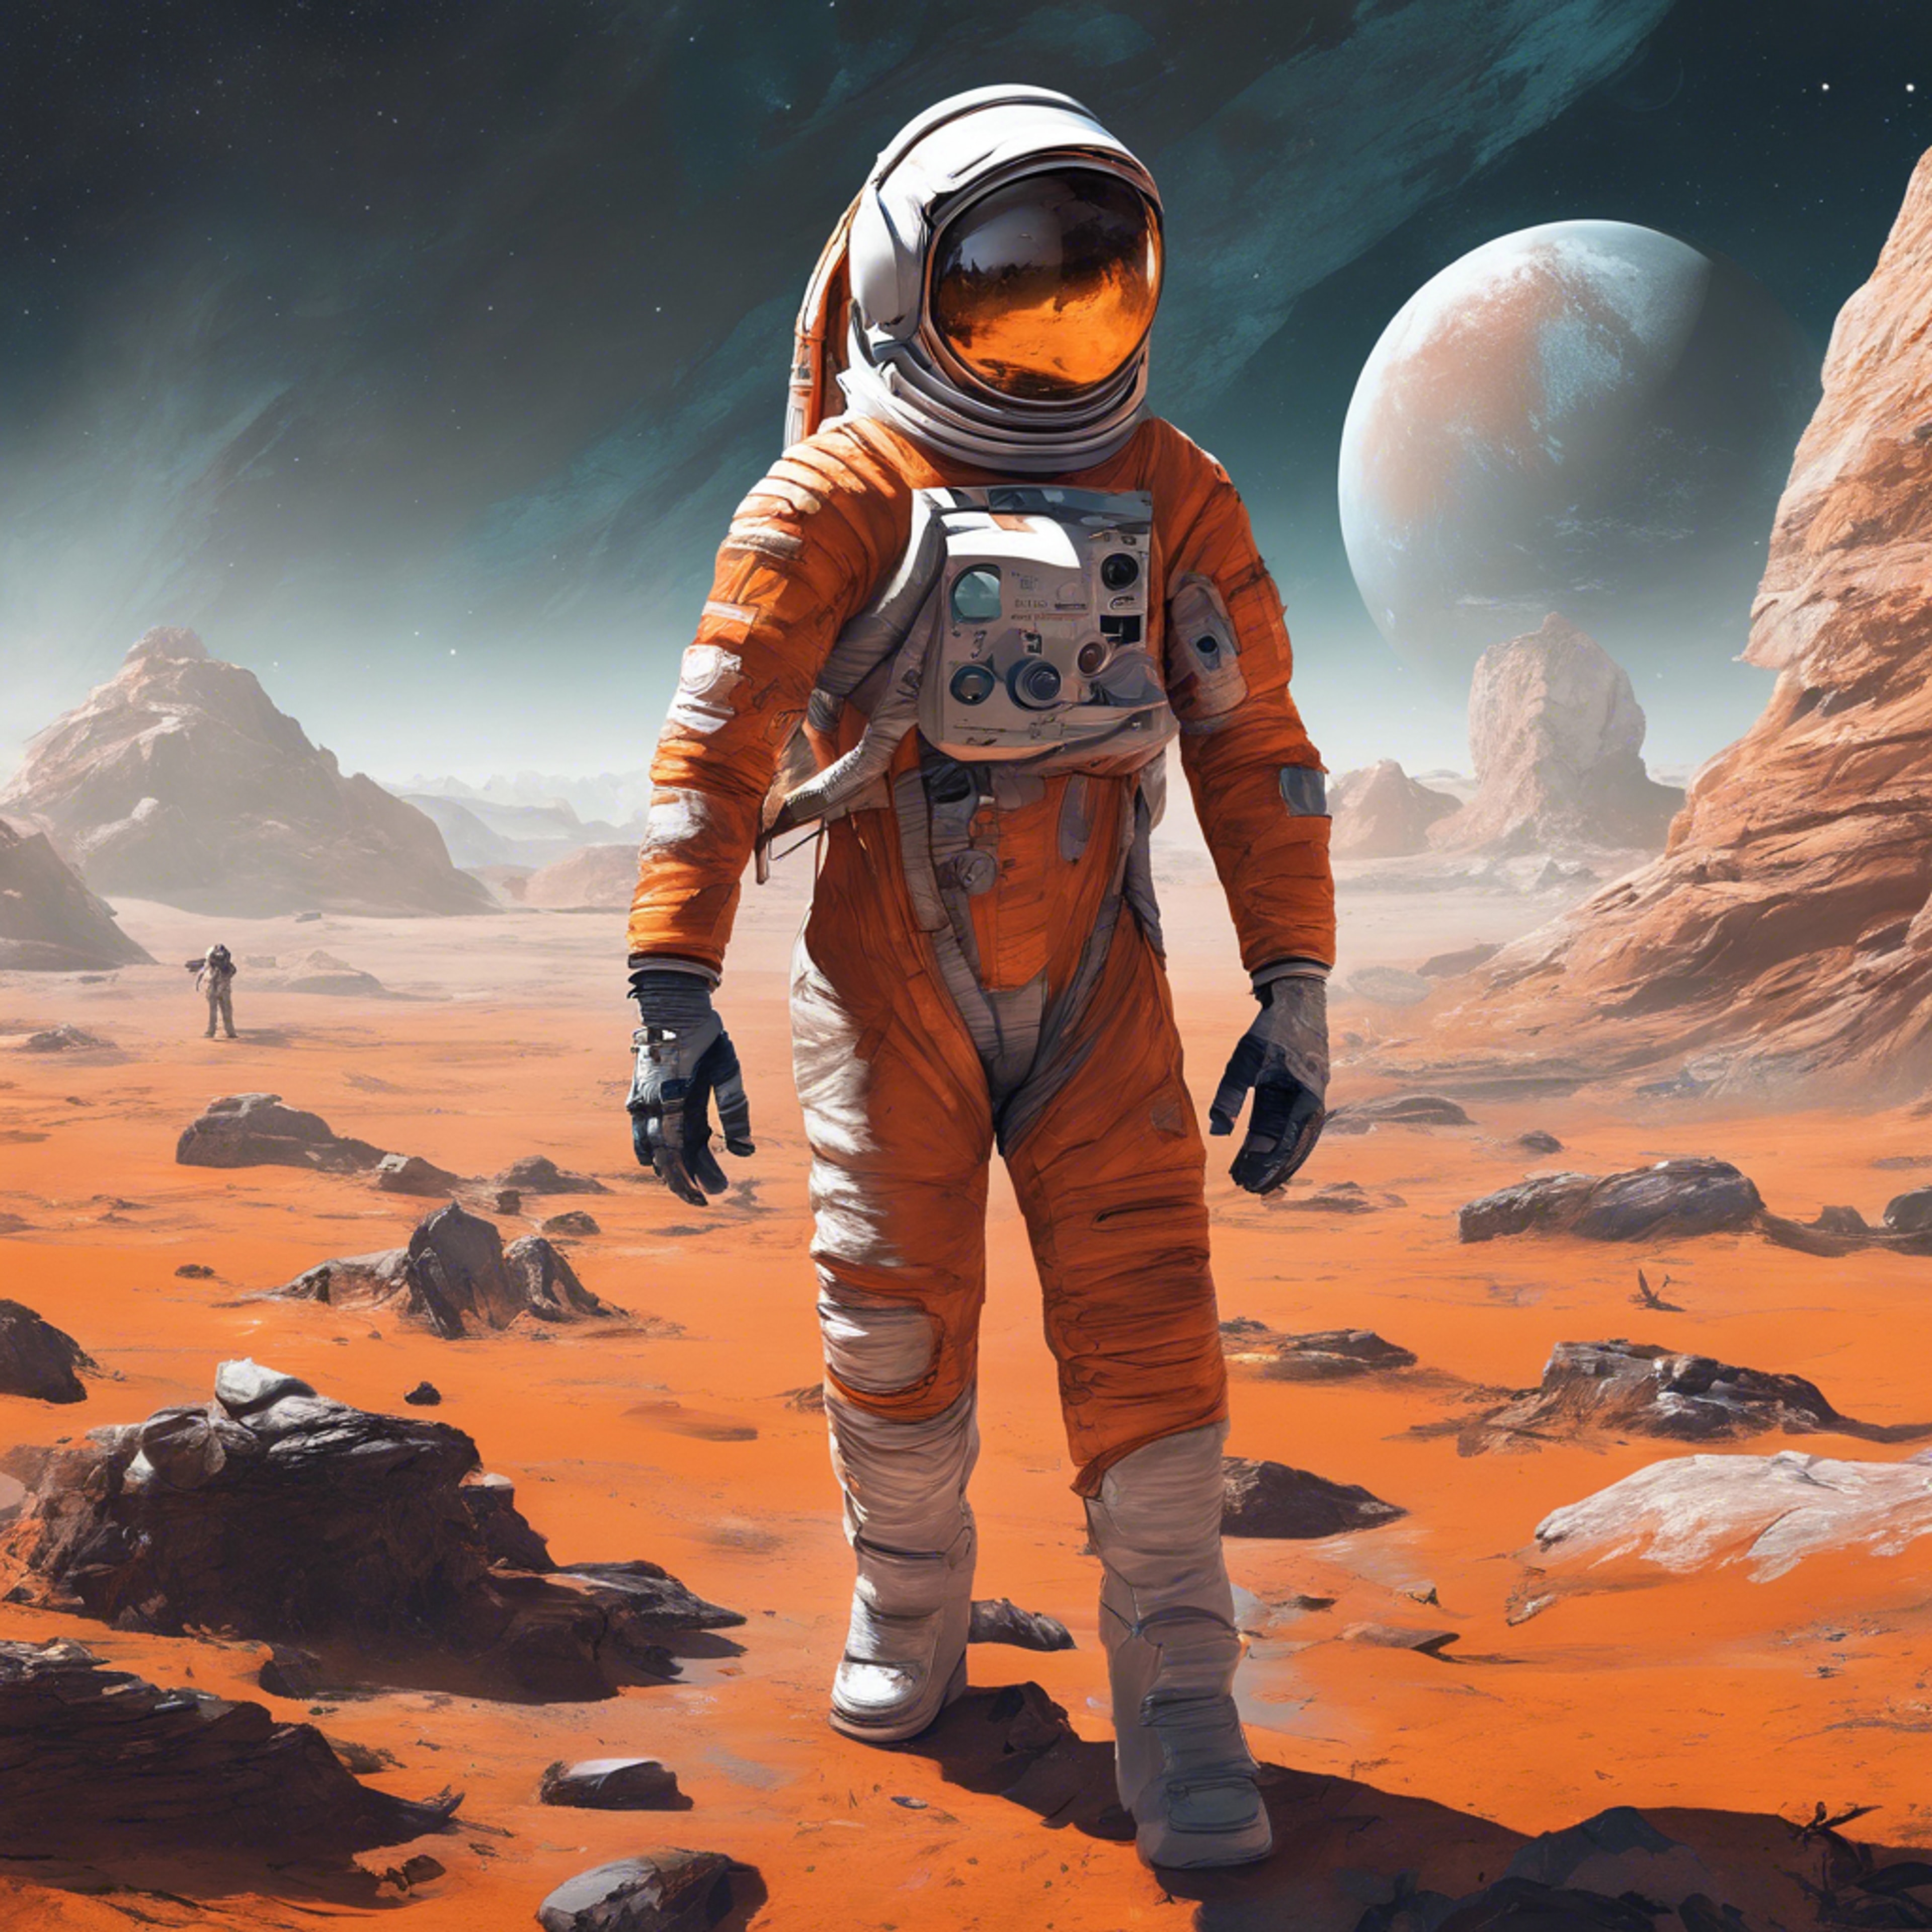 A space-themed video game featuring an astronaut in an orange and white suit exploring an alien planet. Tapetai[5d2c49abc07a4c83ad01]